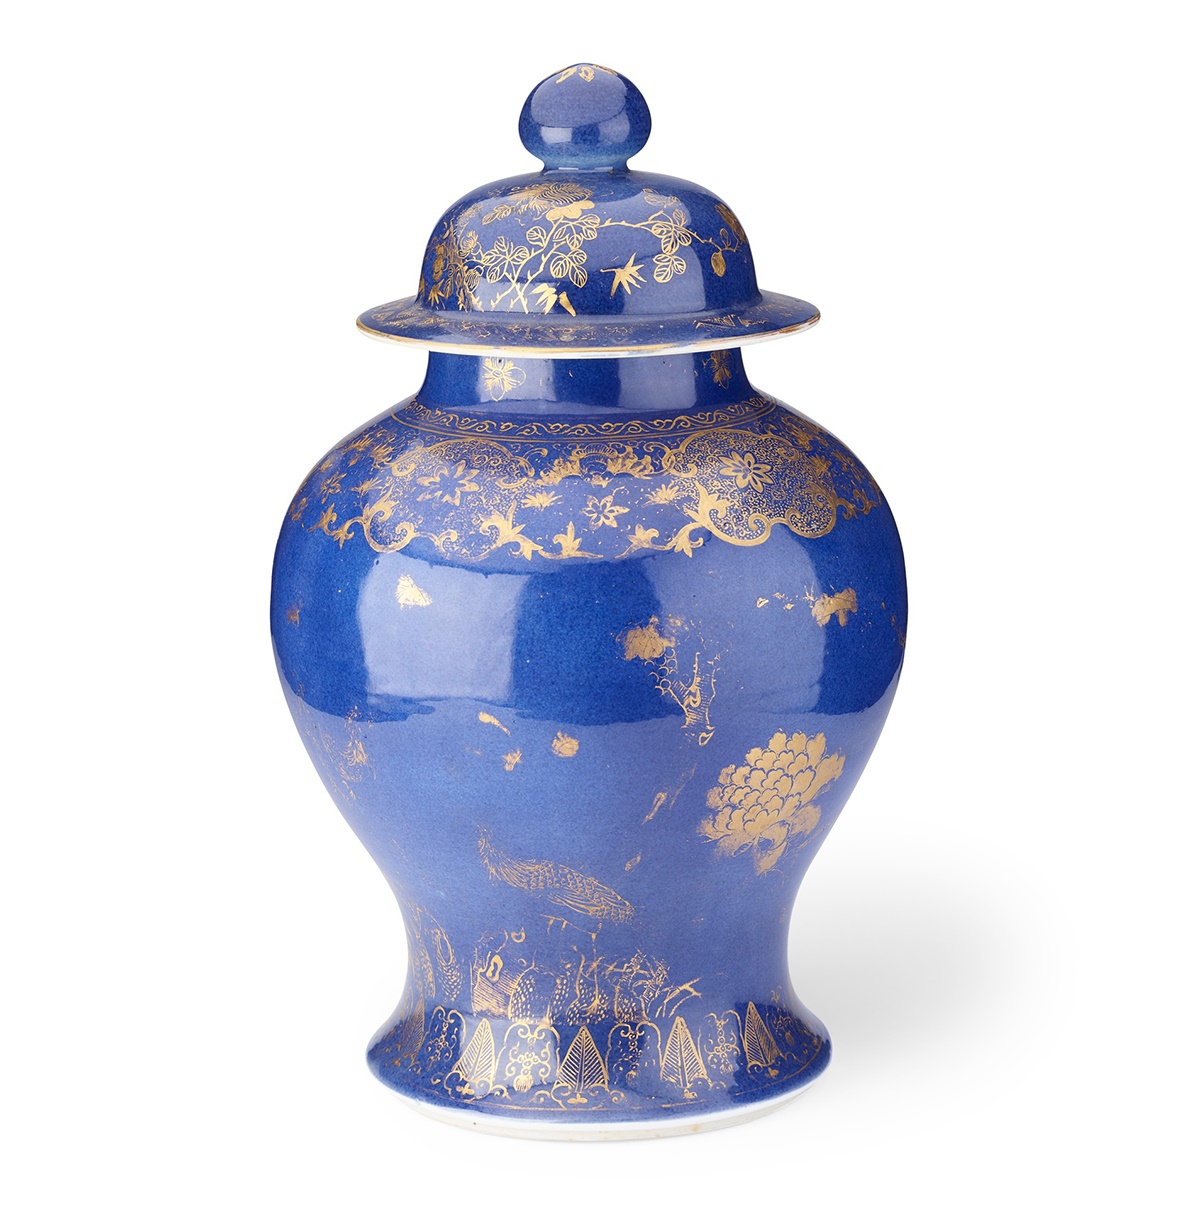 LOT 162 | GILT-DECORATED POWDER-BLUE-GLAZED BALUSTER VASE WITH COVER | QING DYNASTY, 18TH CENTURY 清 灑藍地描金花鳥紋將軍罐 | £400 - £600 + fees